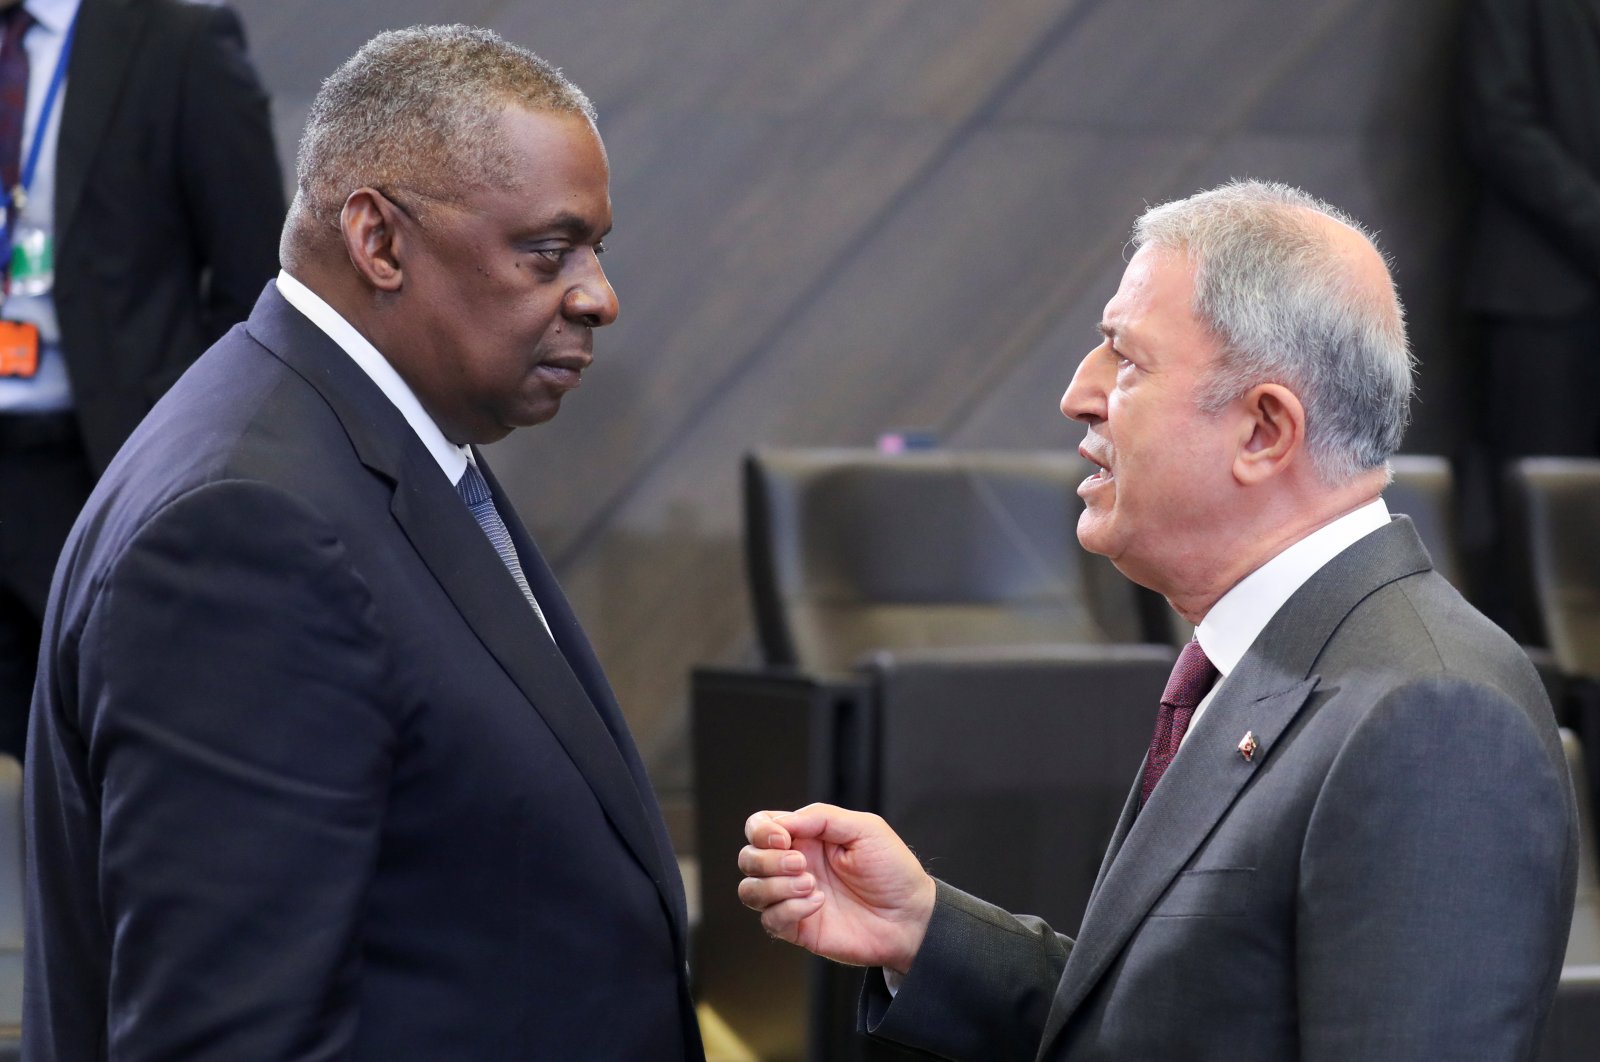 Defense Minister Hulusi Akar speaks with U.S. Defense Secretary Lloyd Austin as they attend a NATO defense ministers meeting in Brussels, Belgium, Oct. 22, 2021. (Reuters Photo)